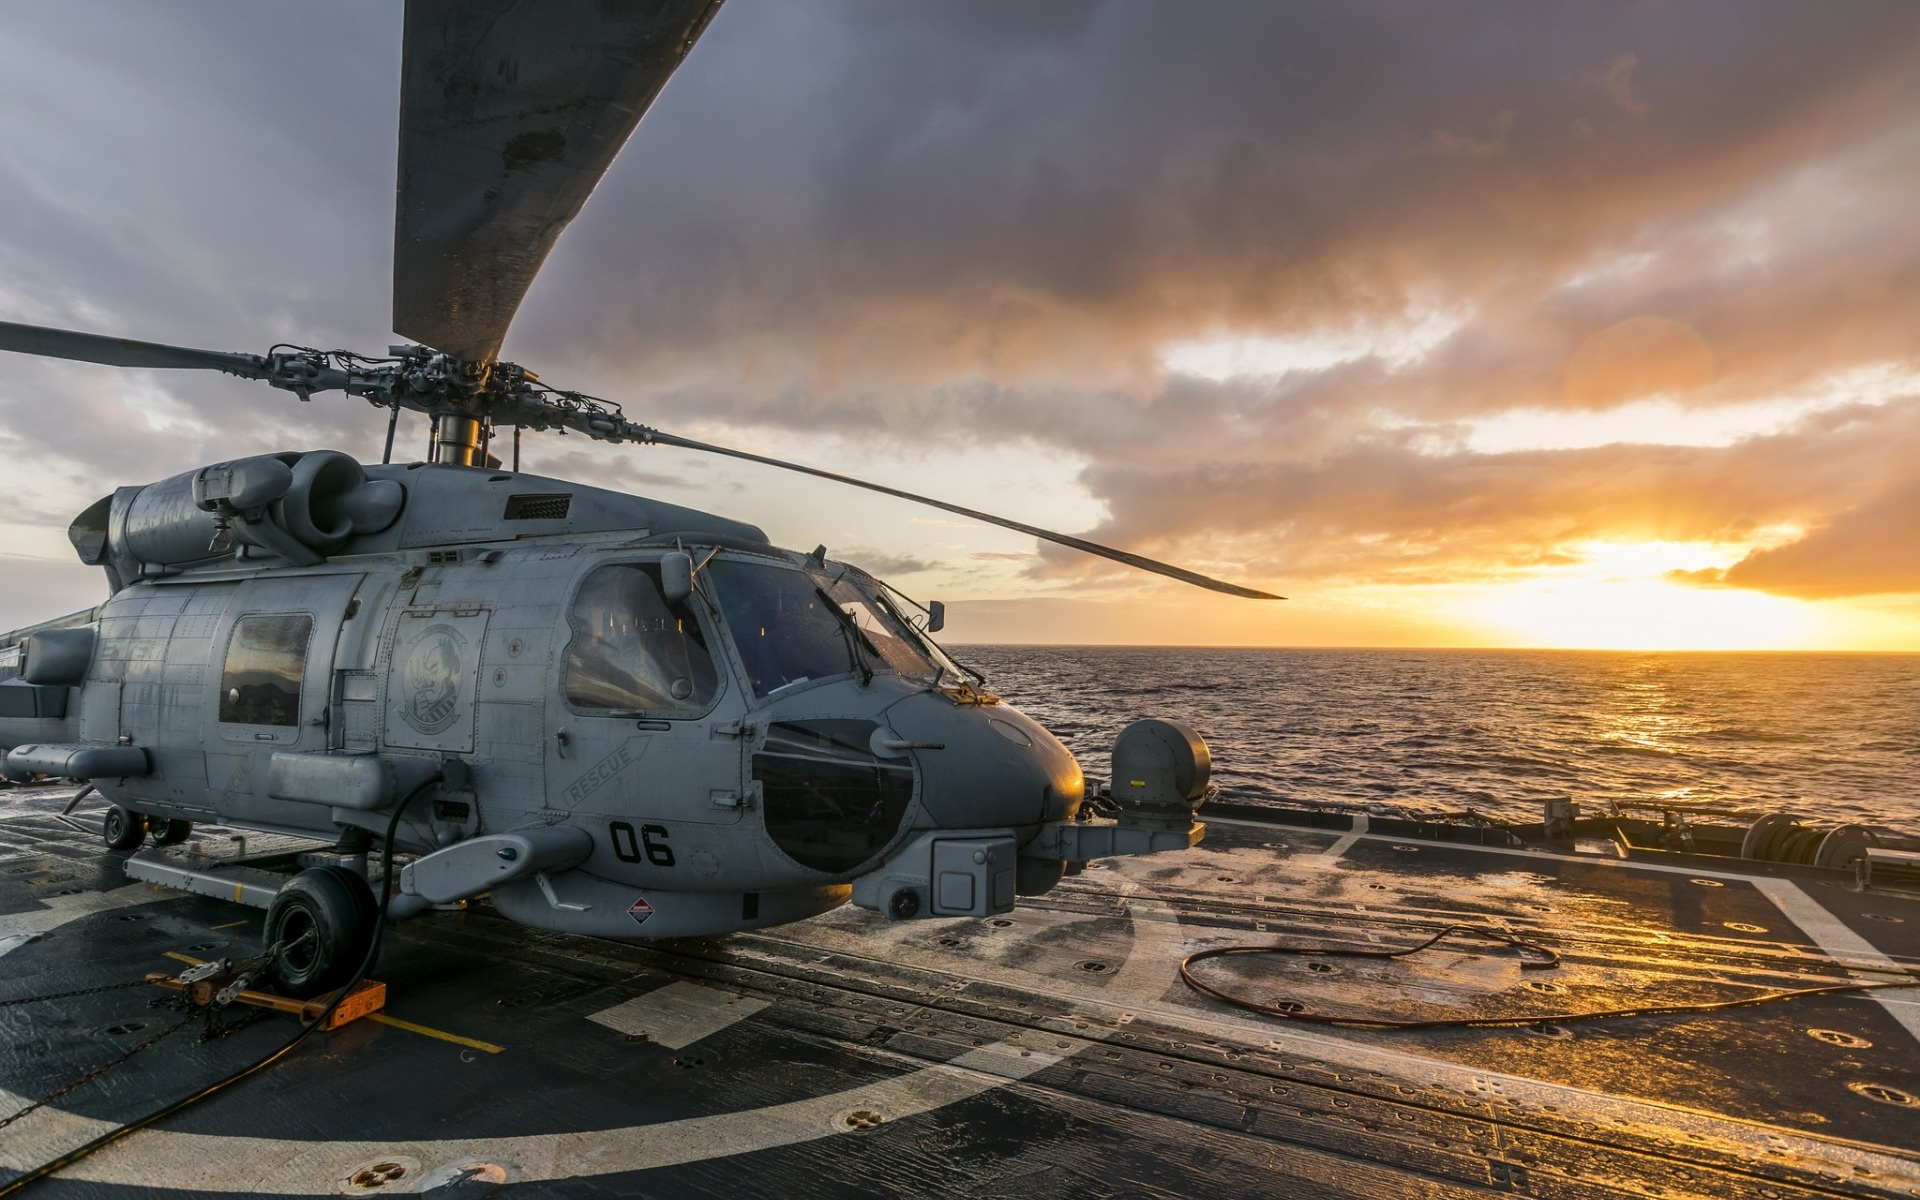 Sikorsky SH-60 Seahawk, Military helicopter, Aircraft carrier, Sunset sea, 1920x1200 HD Desktop